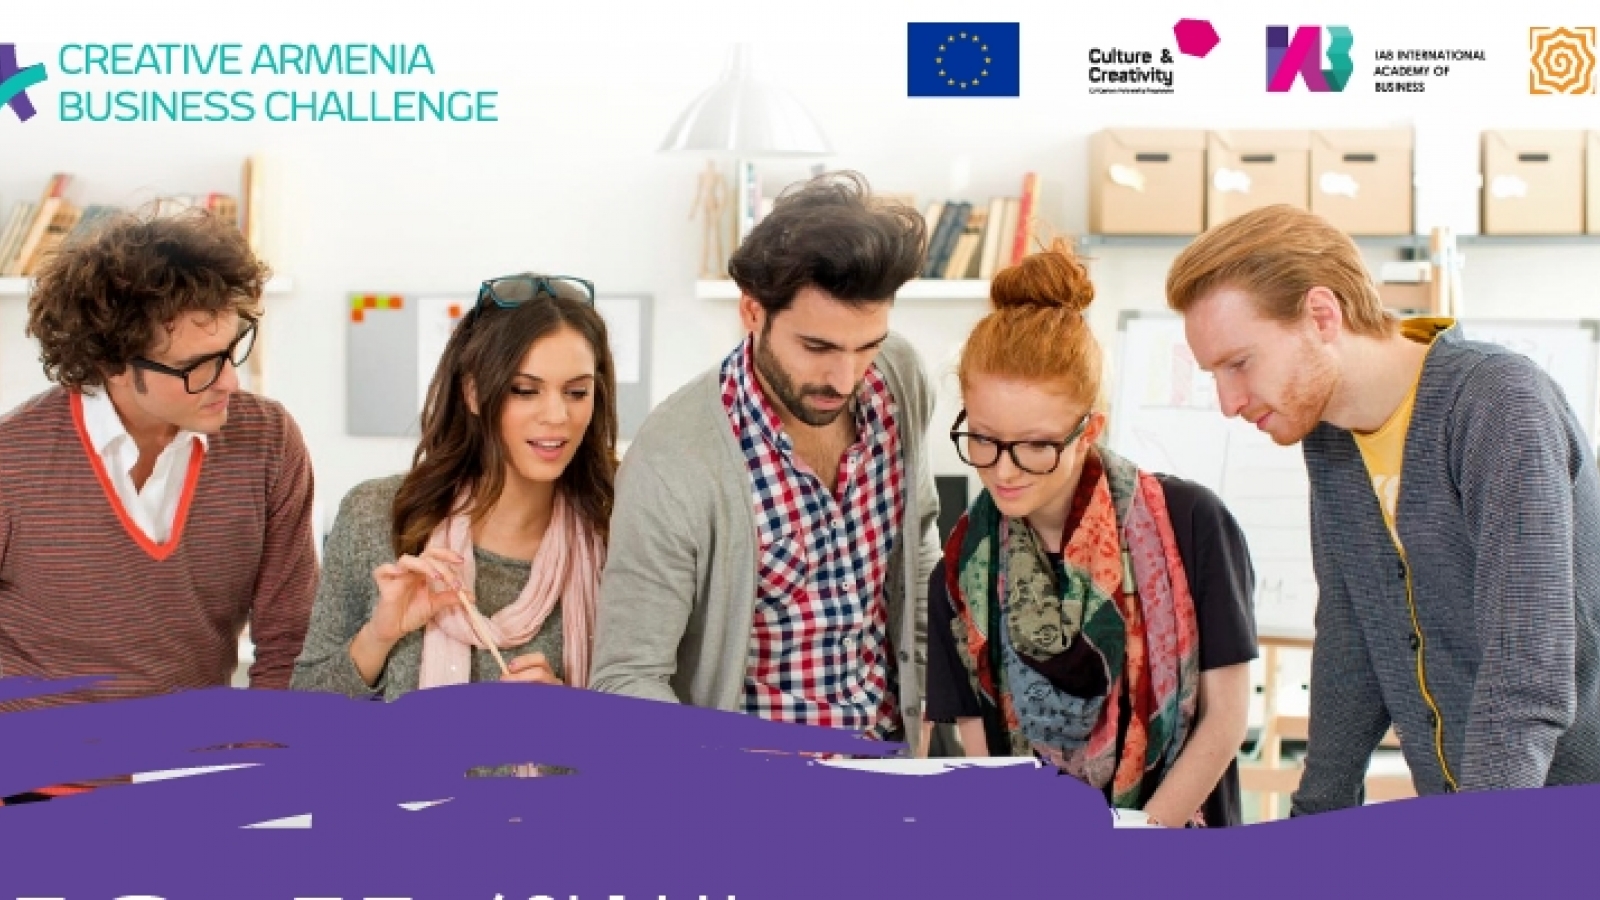 Armenia: creative startups invited to take part in Business Challenge